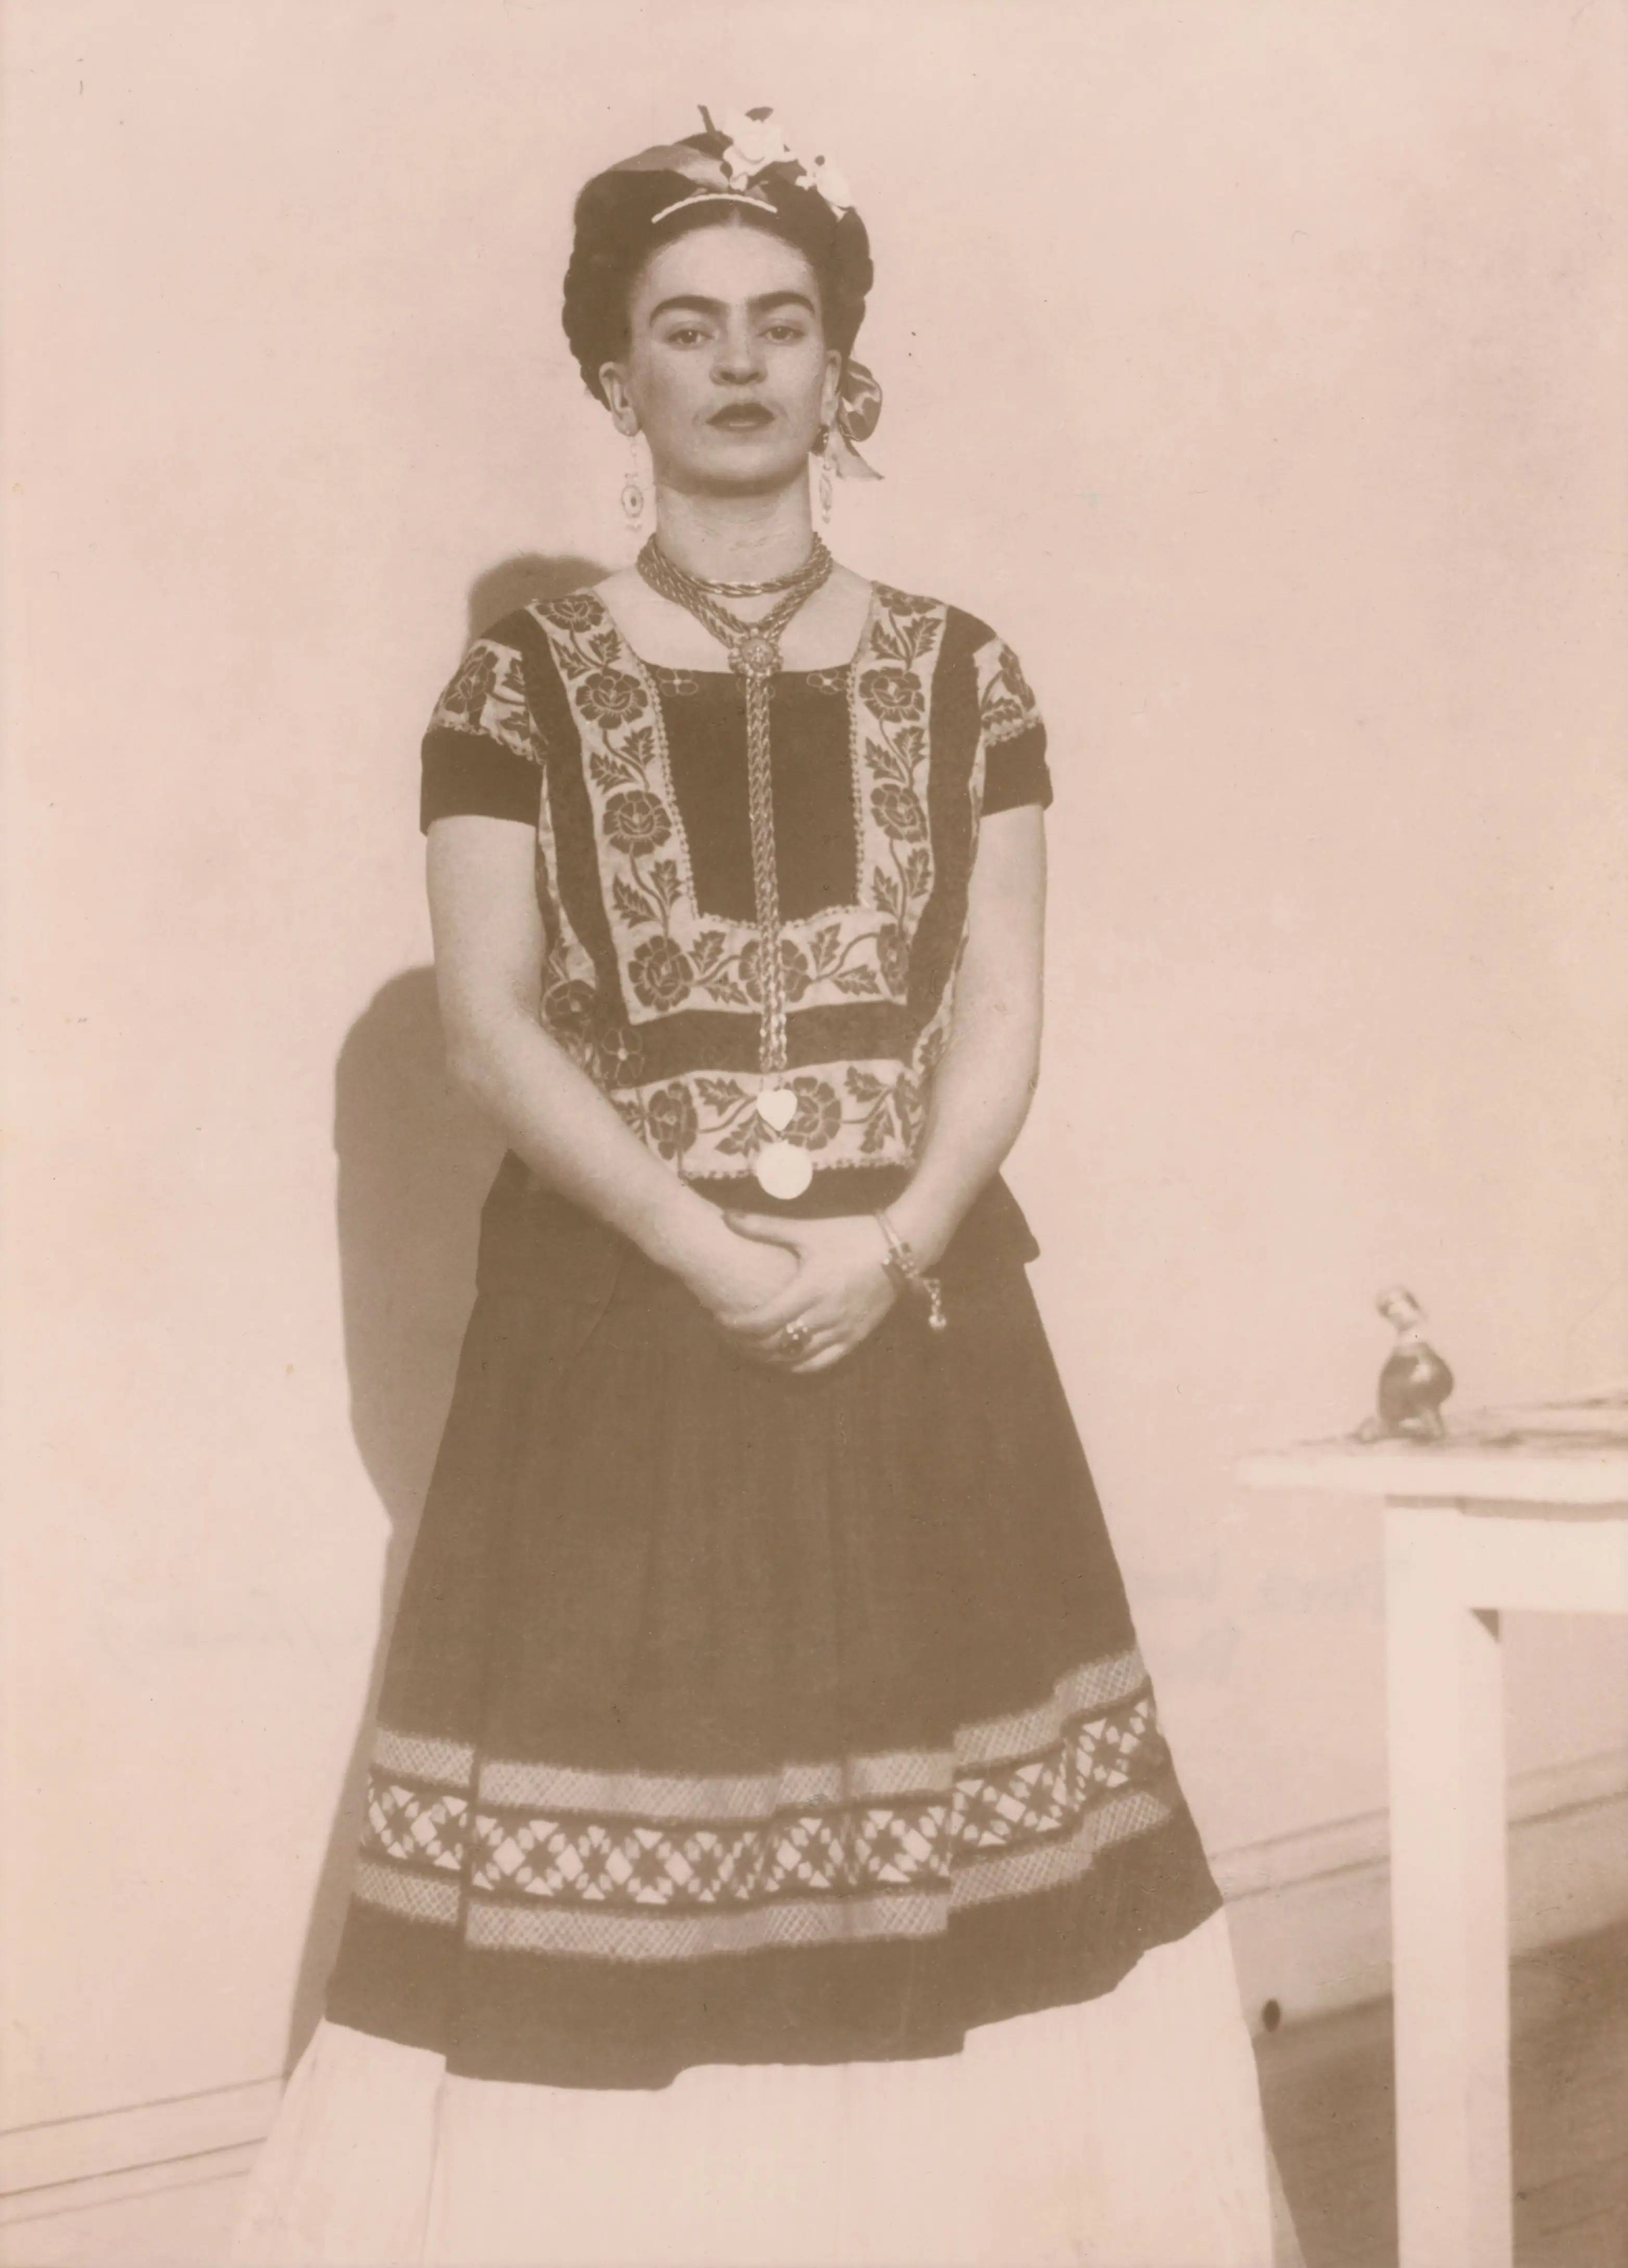 Frida Kahlo par Julien Levy, vers 1938 © DR, collection privée © Diego Rivera and Frida Kahlo archives, Bank of México, fiduciary in the Frida Kahlo and Diego Rivera Museums Trust